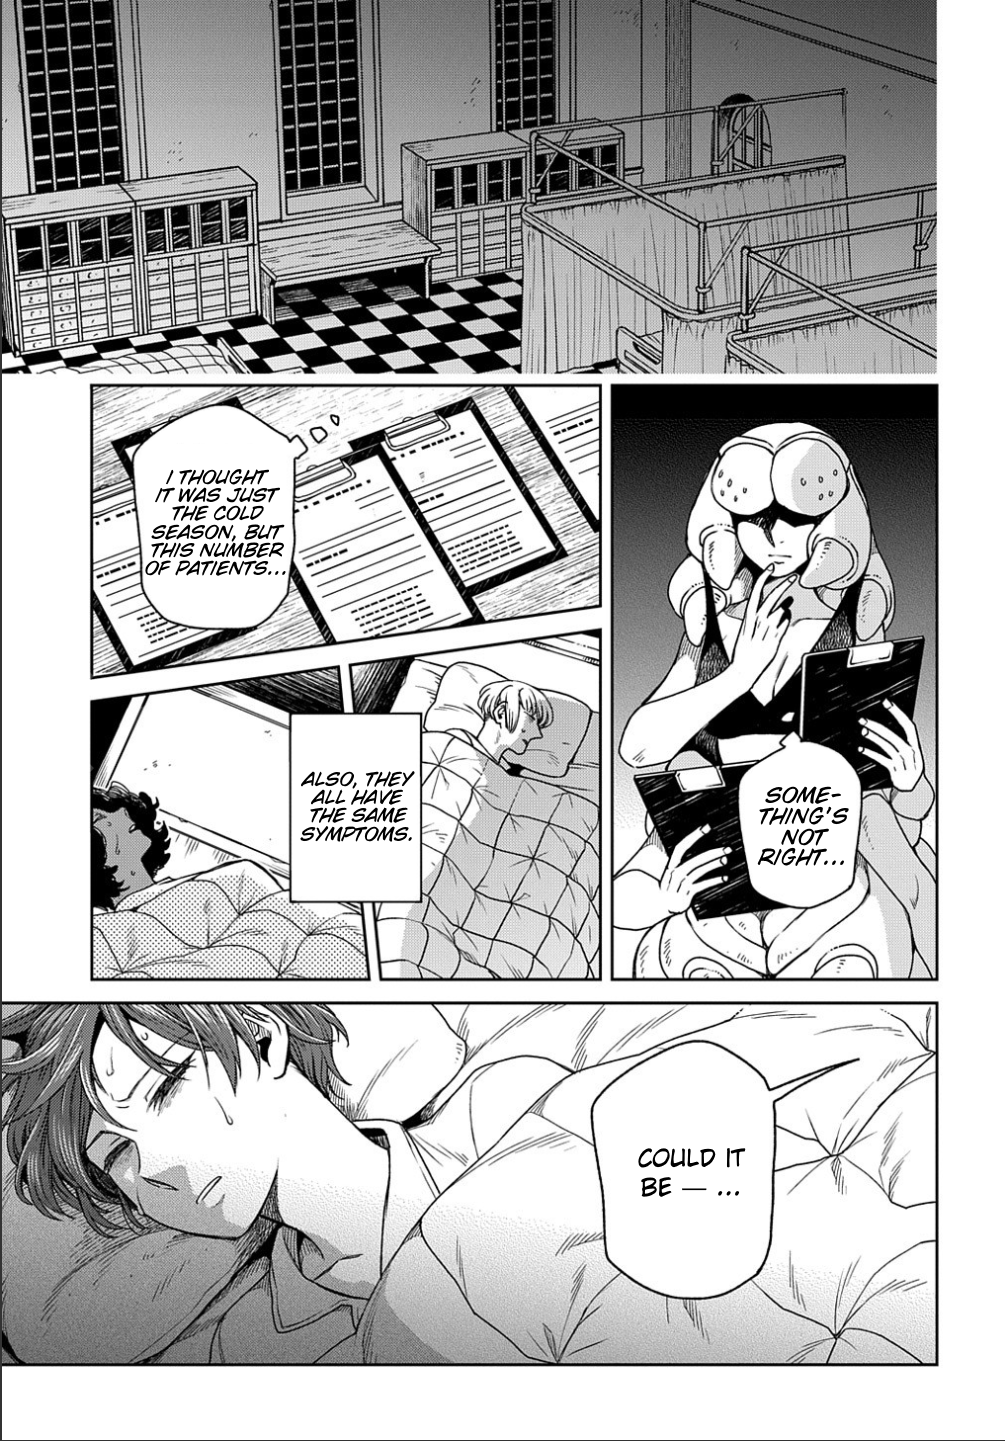 Mahoutsukai no Yome Vol.16-Chapter.76-Needs-must-when-the-devil-drives.-II Image